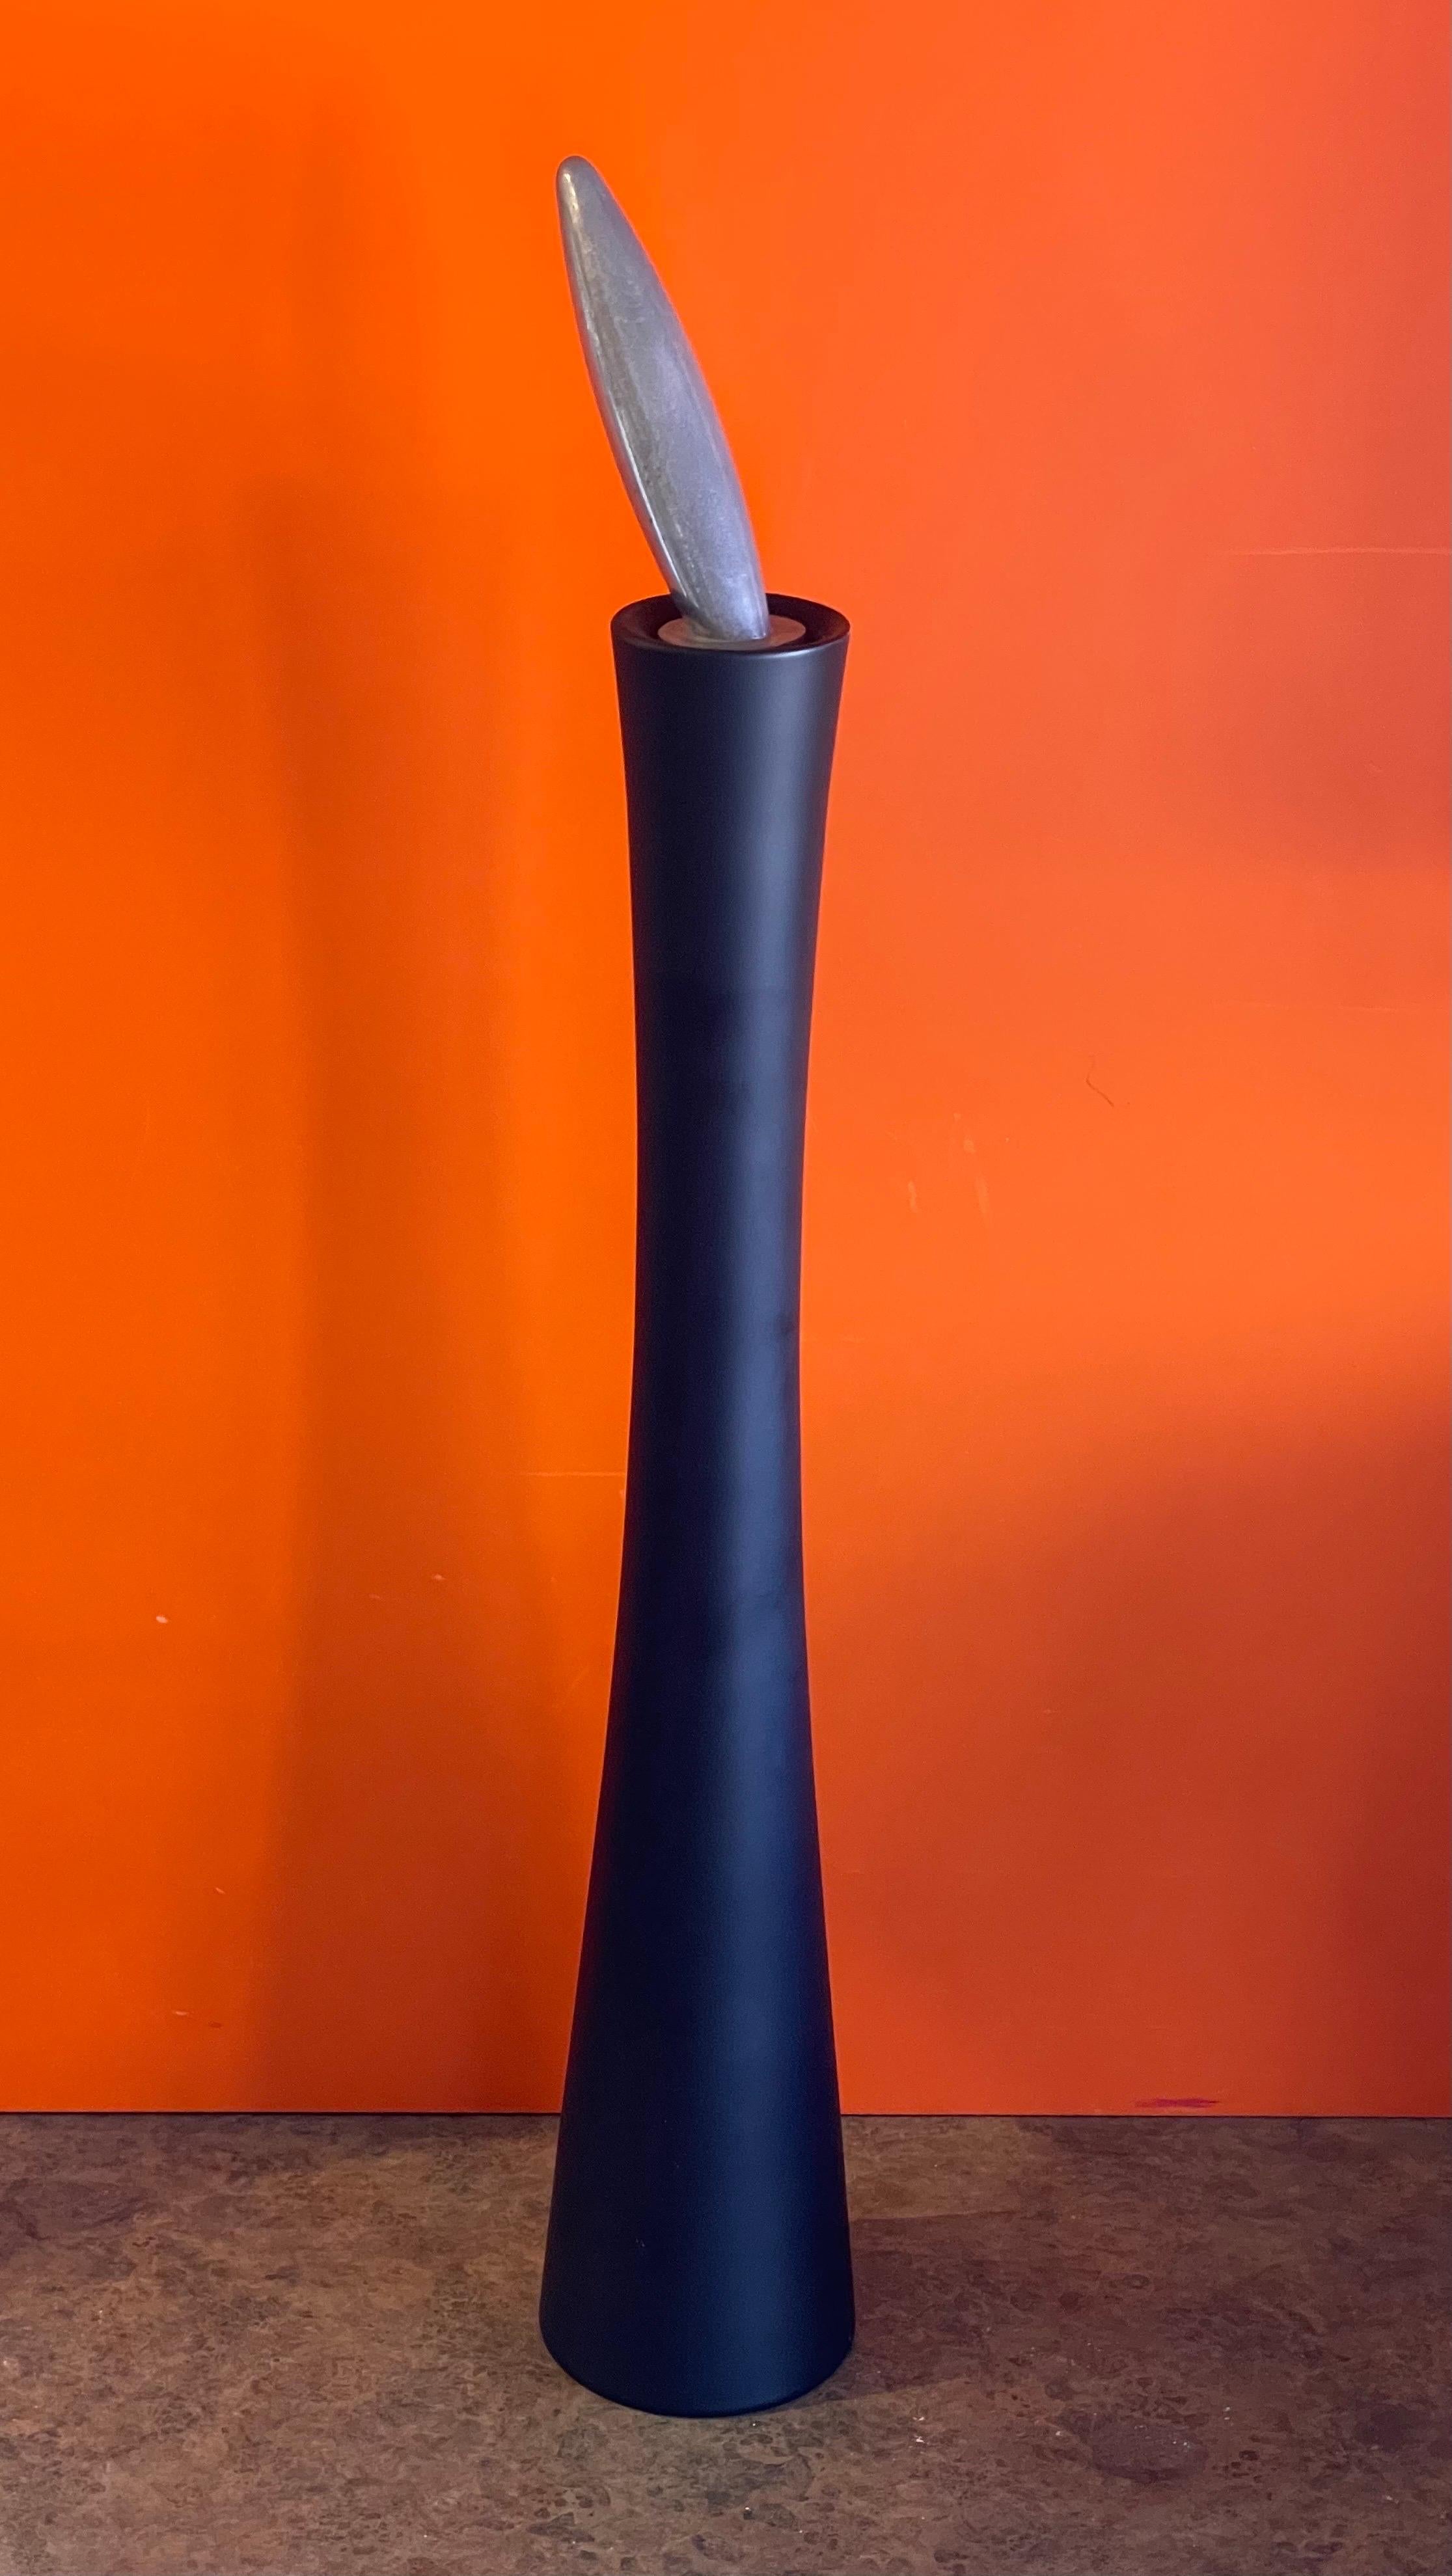 A very hard to find Mid-Century Modern MP156 tall pepper mill by Paolo Pagani for Twergi / Alessi of Italy, circa 1970s. The piece is made of lacquered beech wood with a aluminum handle and is in very good vintage working condition. The pepper mill